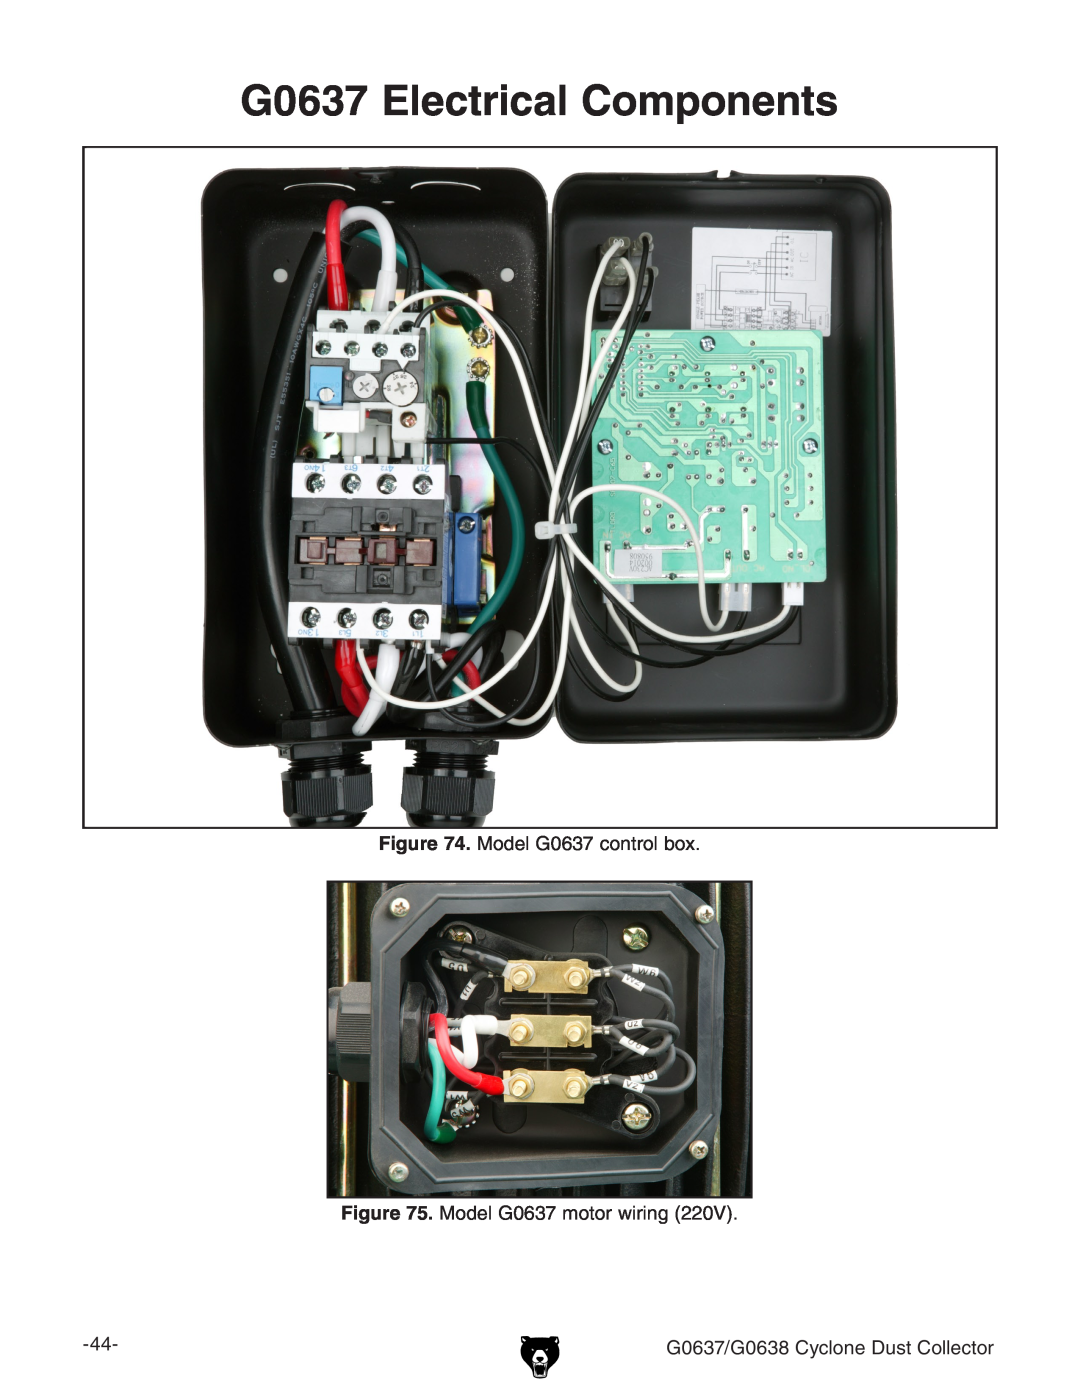 Grizzly G0637 Electrical Components, G0637 electrical components, Model G0637 control box, Model G0637 motor wiring 